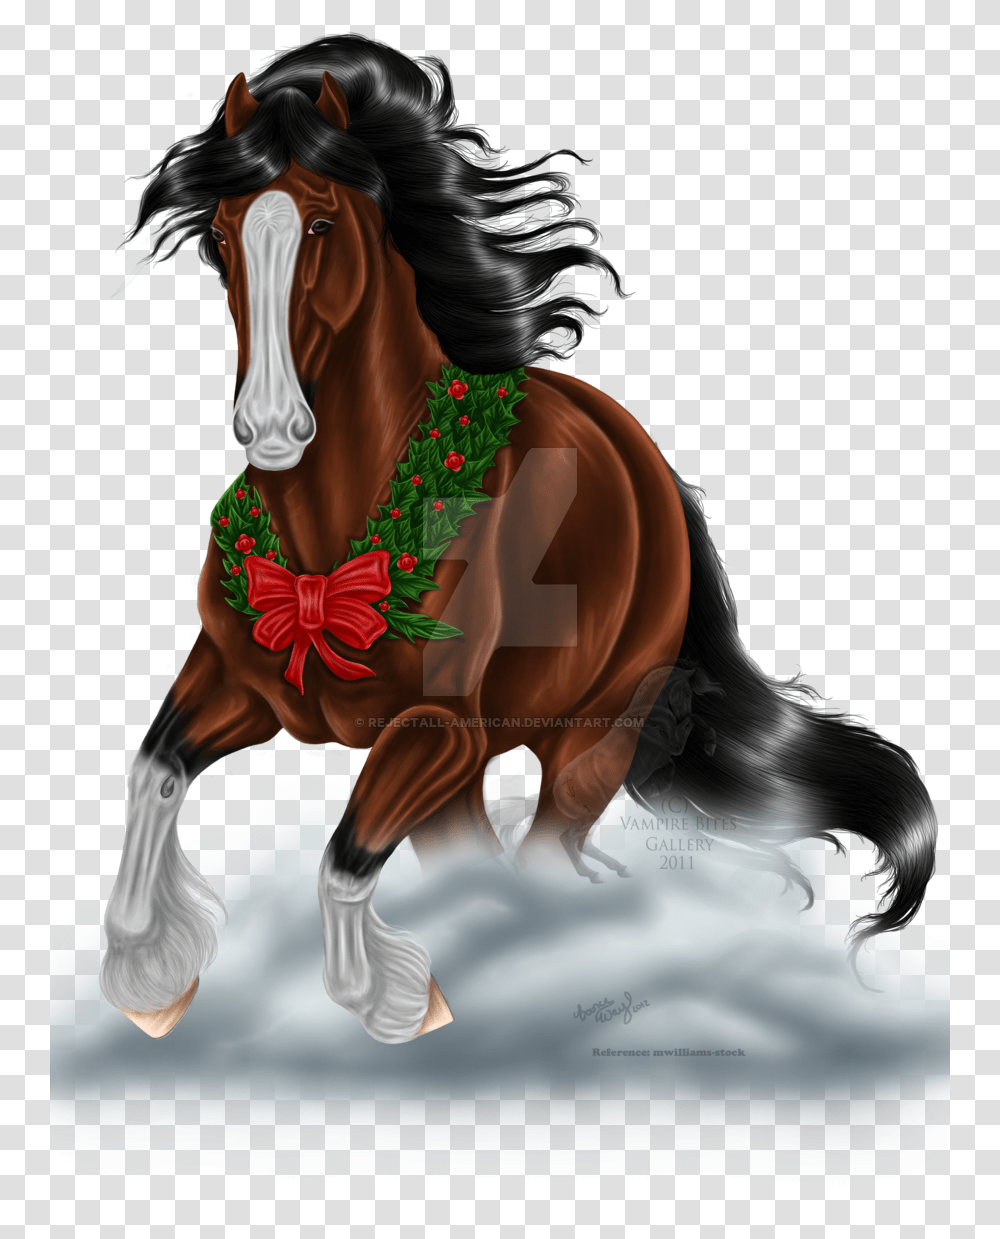 Clydesdale Horse Finished By Rejectall American On Clydesdale Horses For Christmas, Mammal, Animal, Stallion, Colt Horse Transparent Png